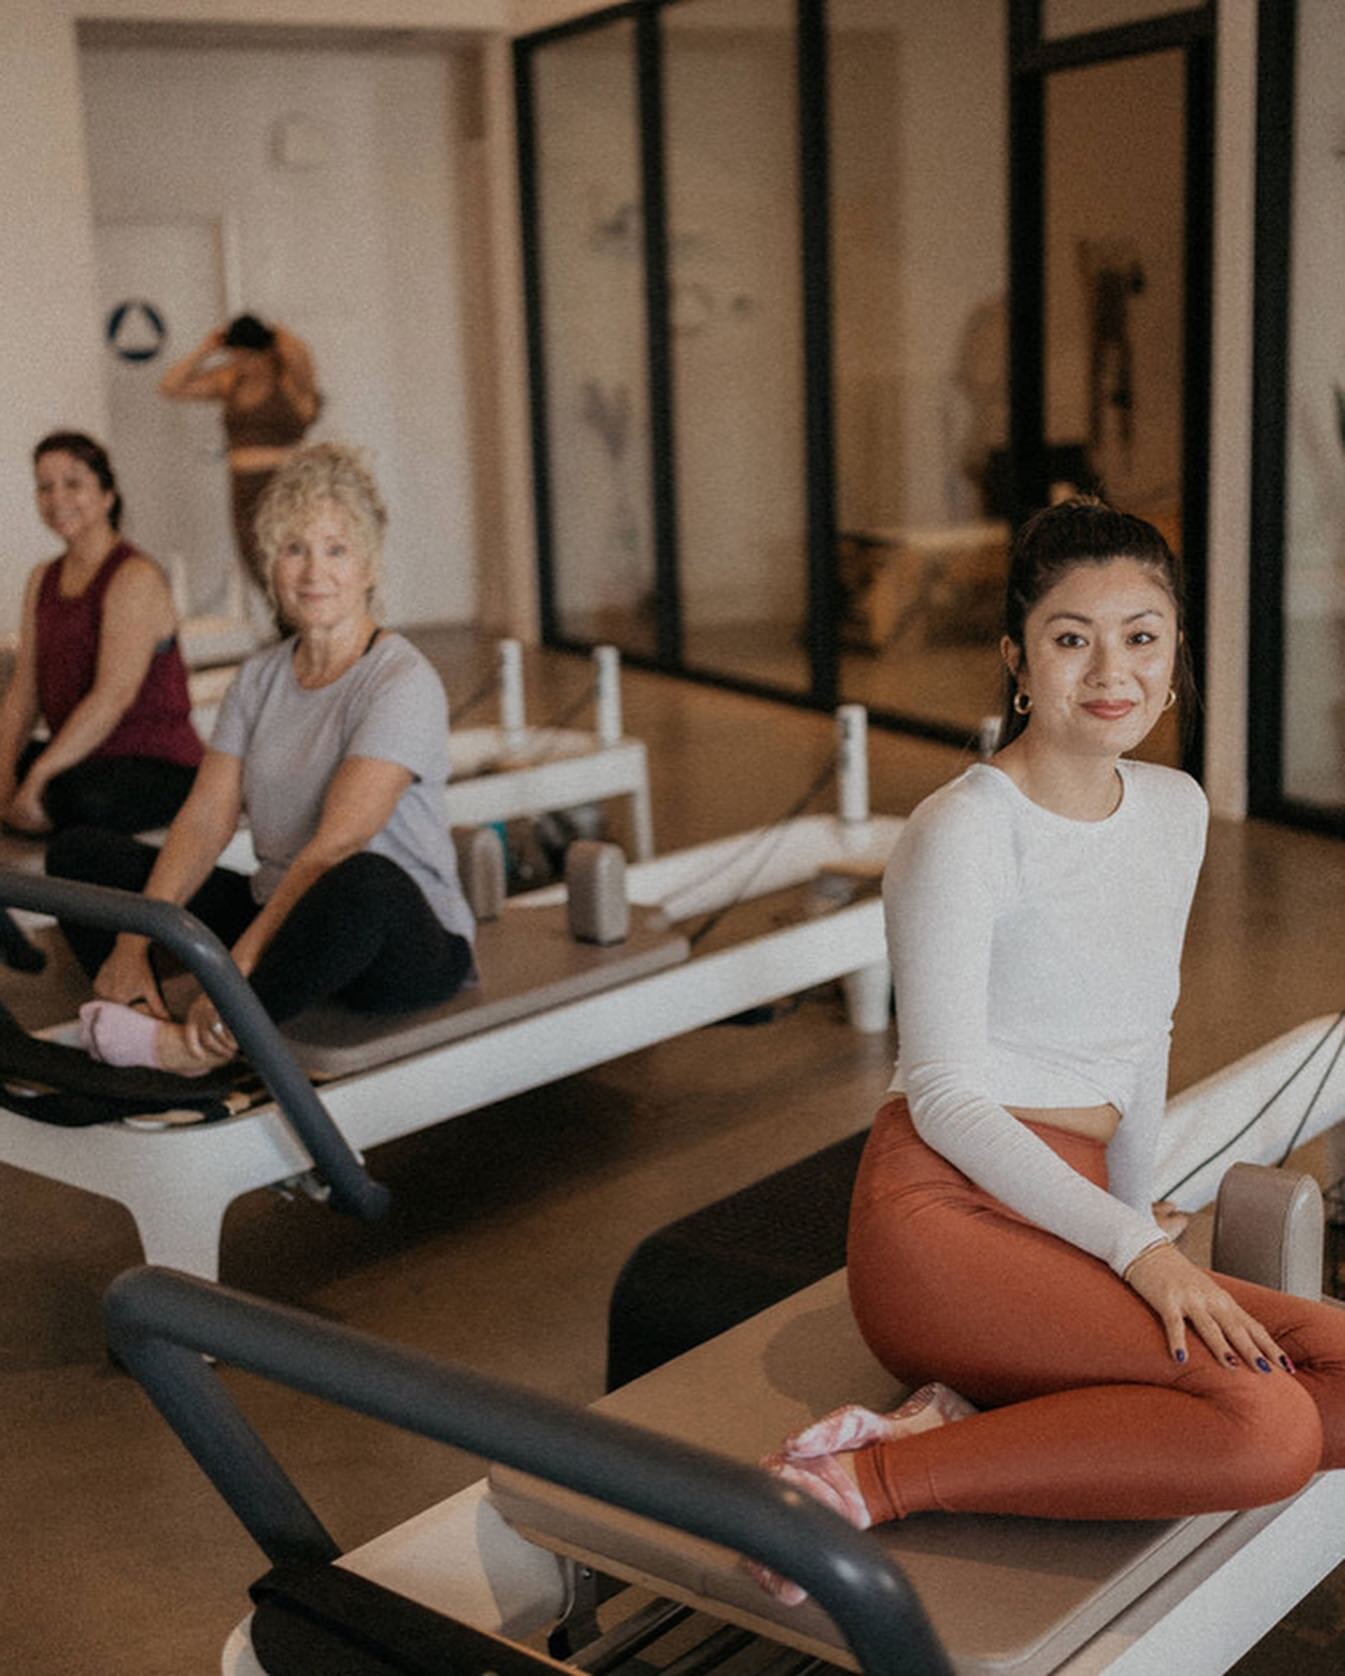 Happy International Women&rsquo;s Day today and everyday 🤍🌎
⠀⠀⠀⠀⠀⠀⠀⠀⠀
To our community &mdash; thank you for choosing Ara, a woman owned business, as your place for Movement. We hope to always leave you feeling empowered after every class and inspi